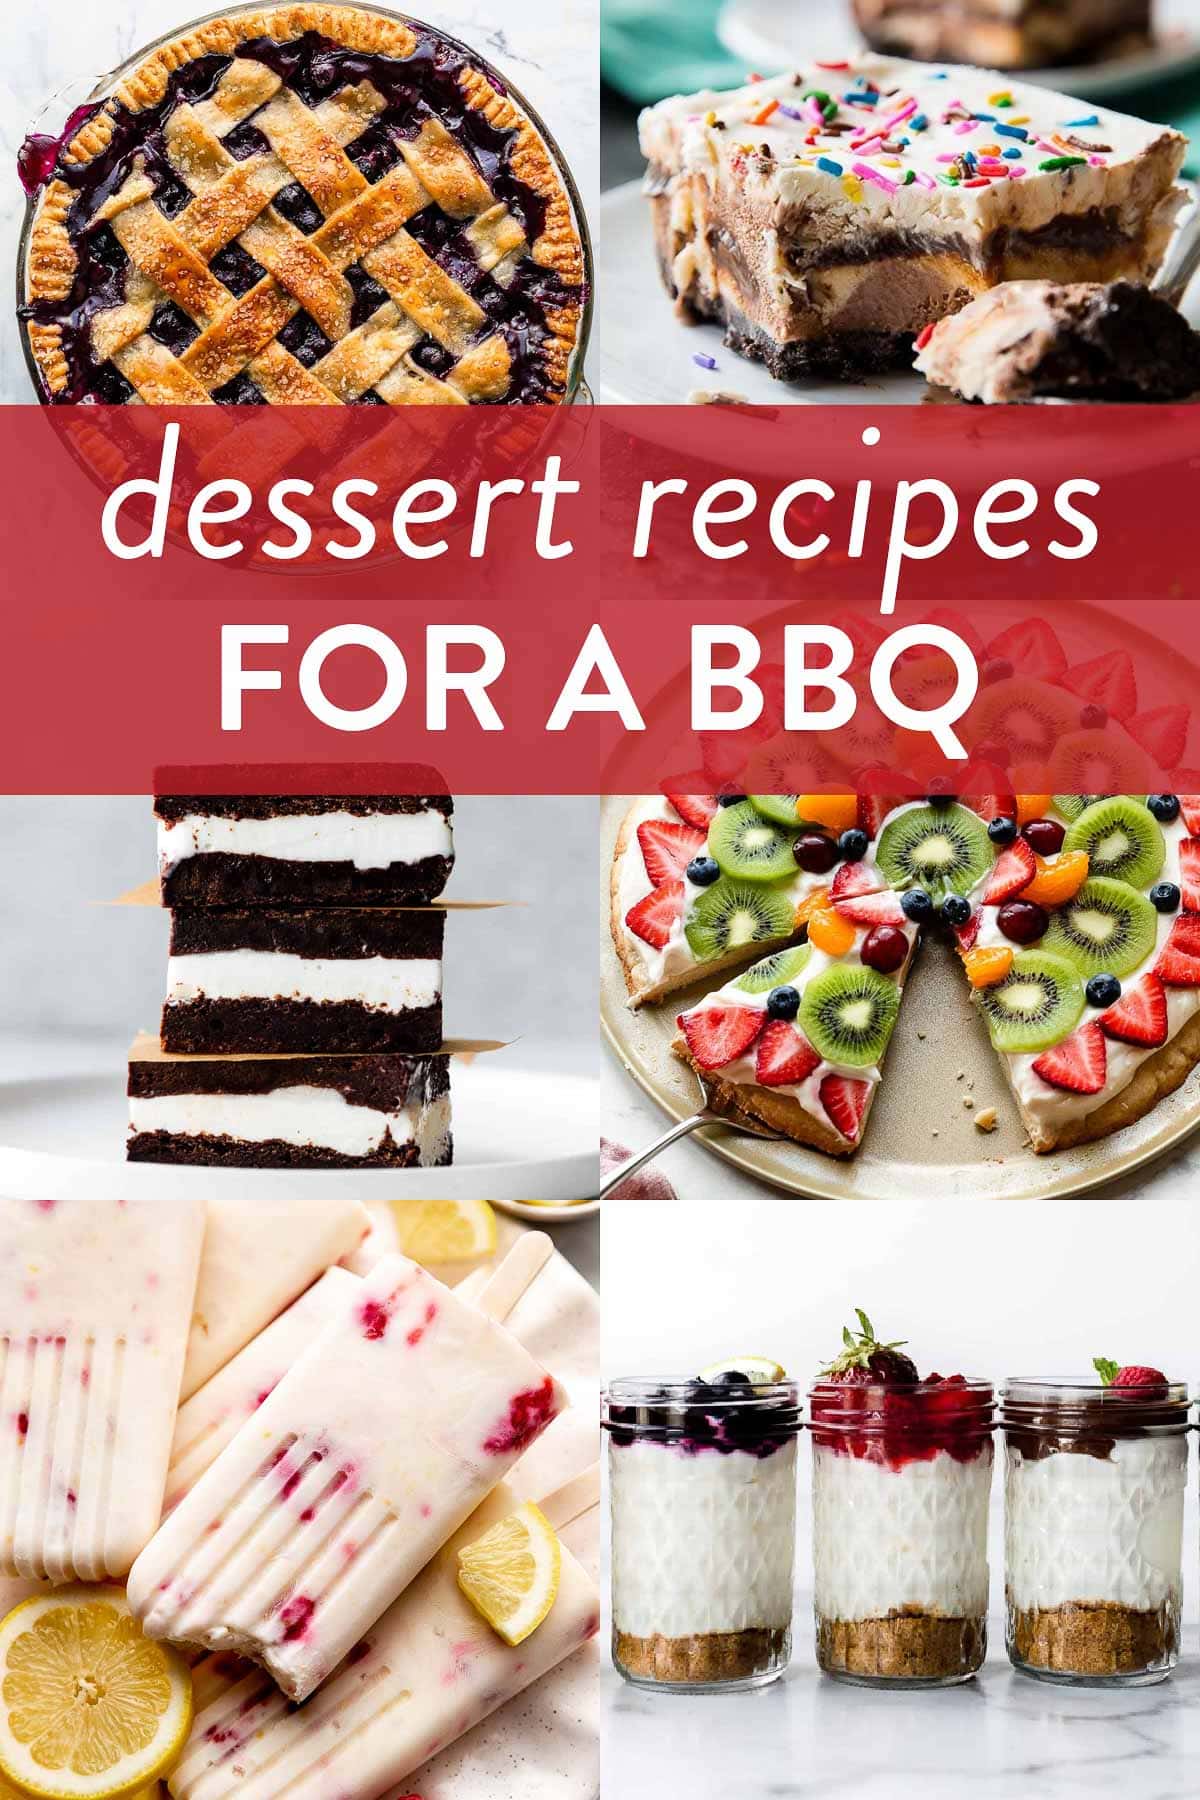 collage of bbq cookout dessert recipes including blueberry pie, ice cream cake, fruit pizza, lemon popsicles, and no bake cheesecake jars.